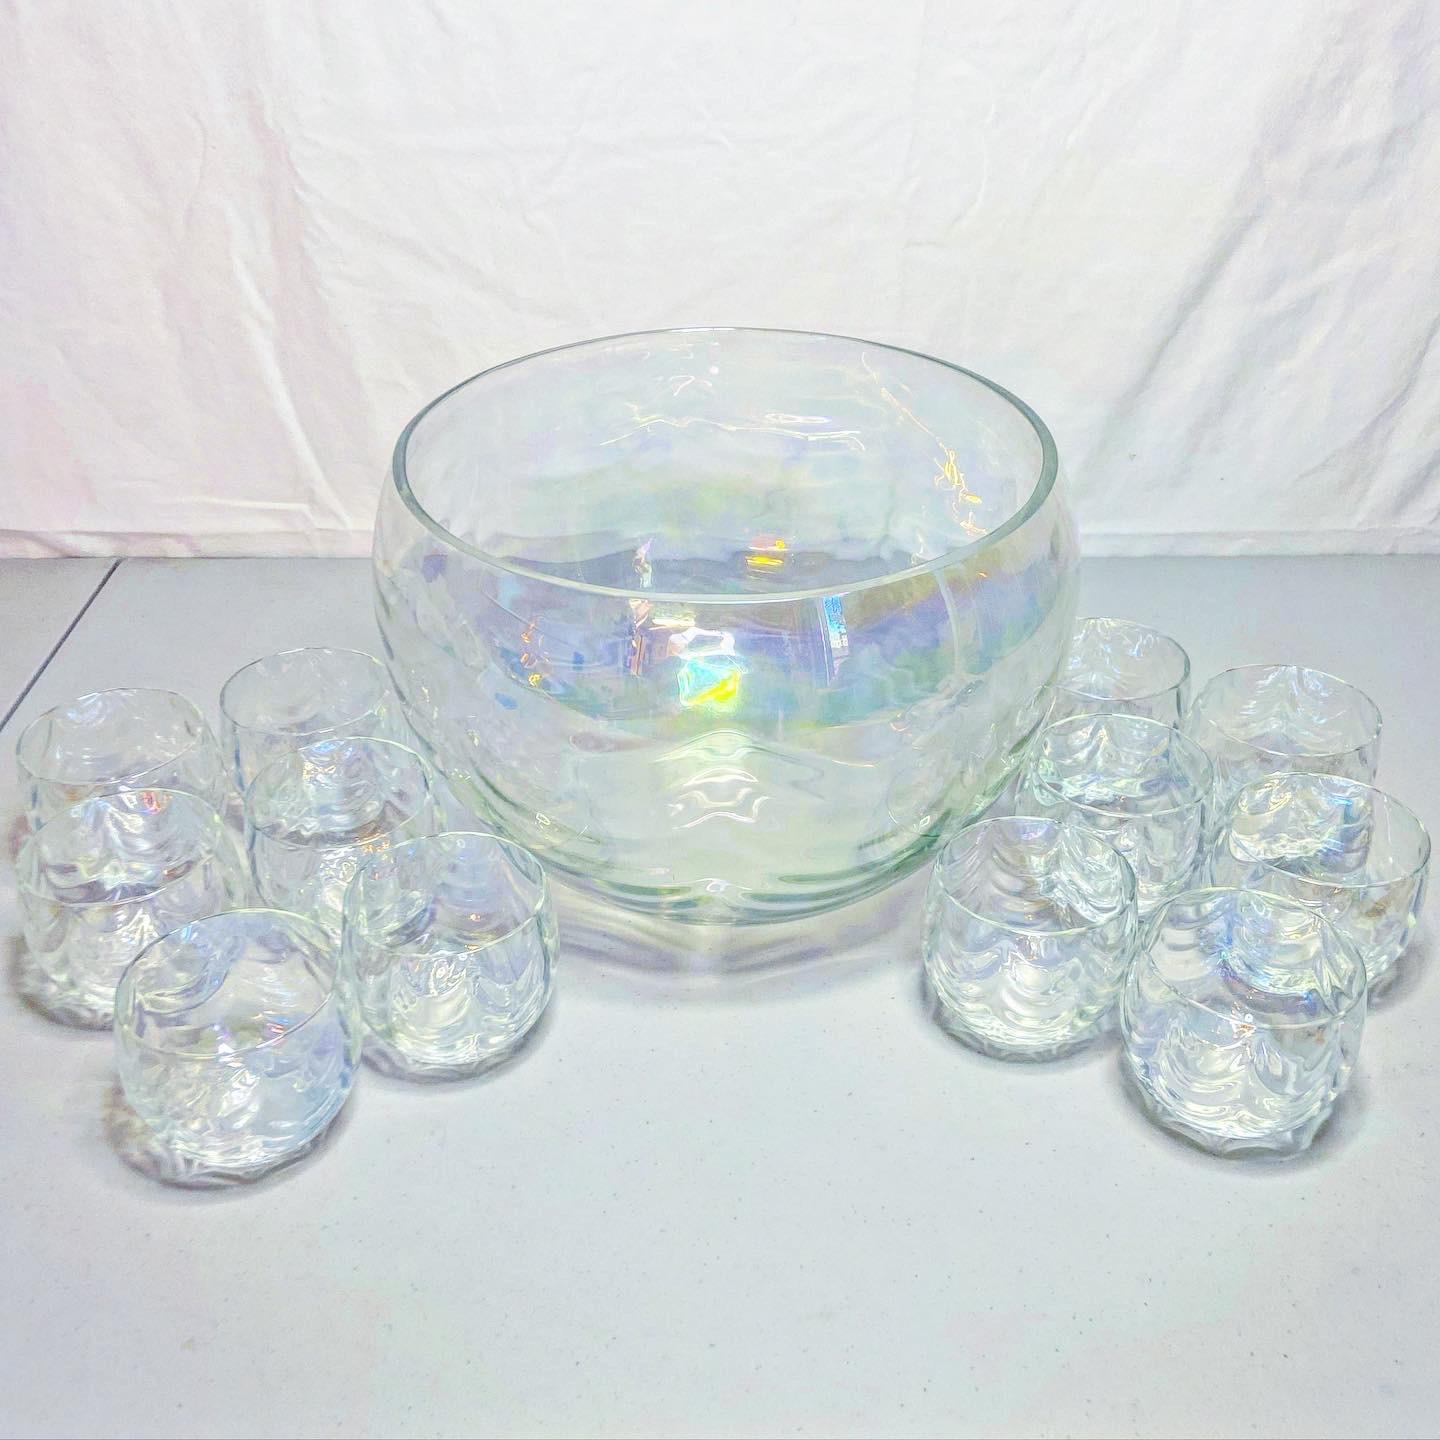 Exceptional punch bowl set with 12 glasses. Features an iridescent glass.

Each cup measures 3”D, 2.75”H.